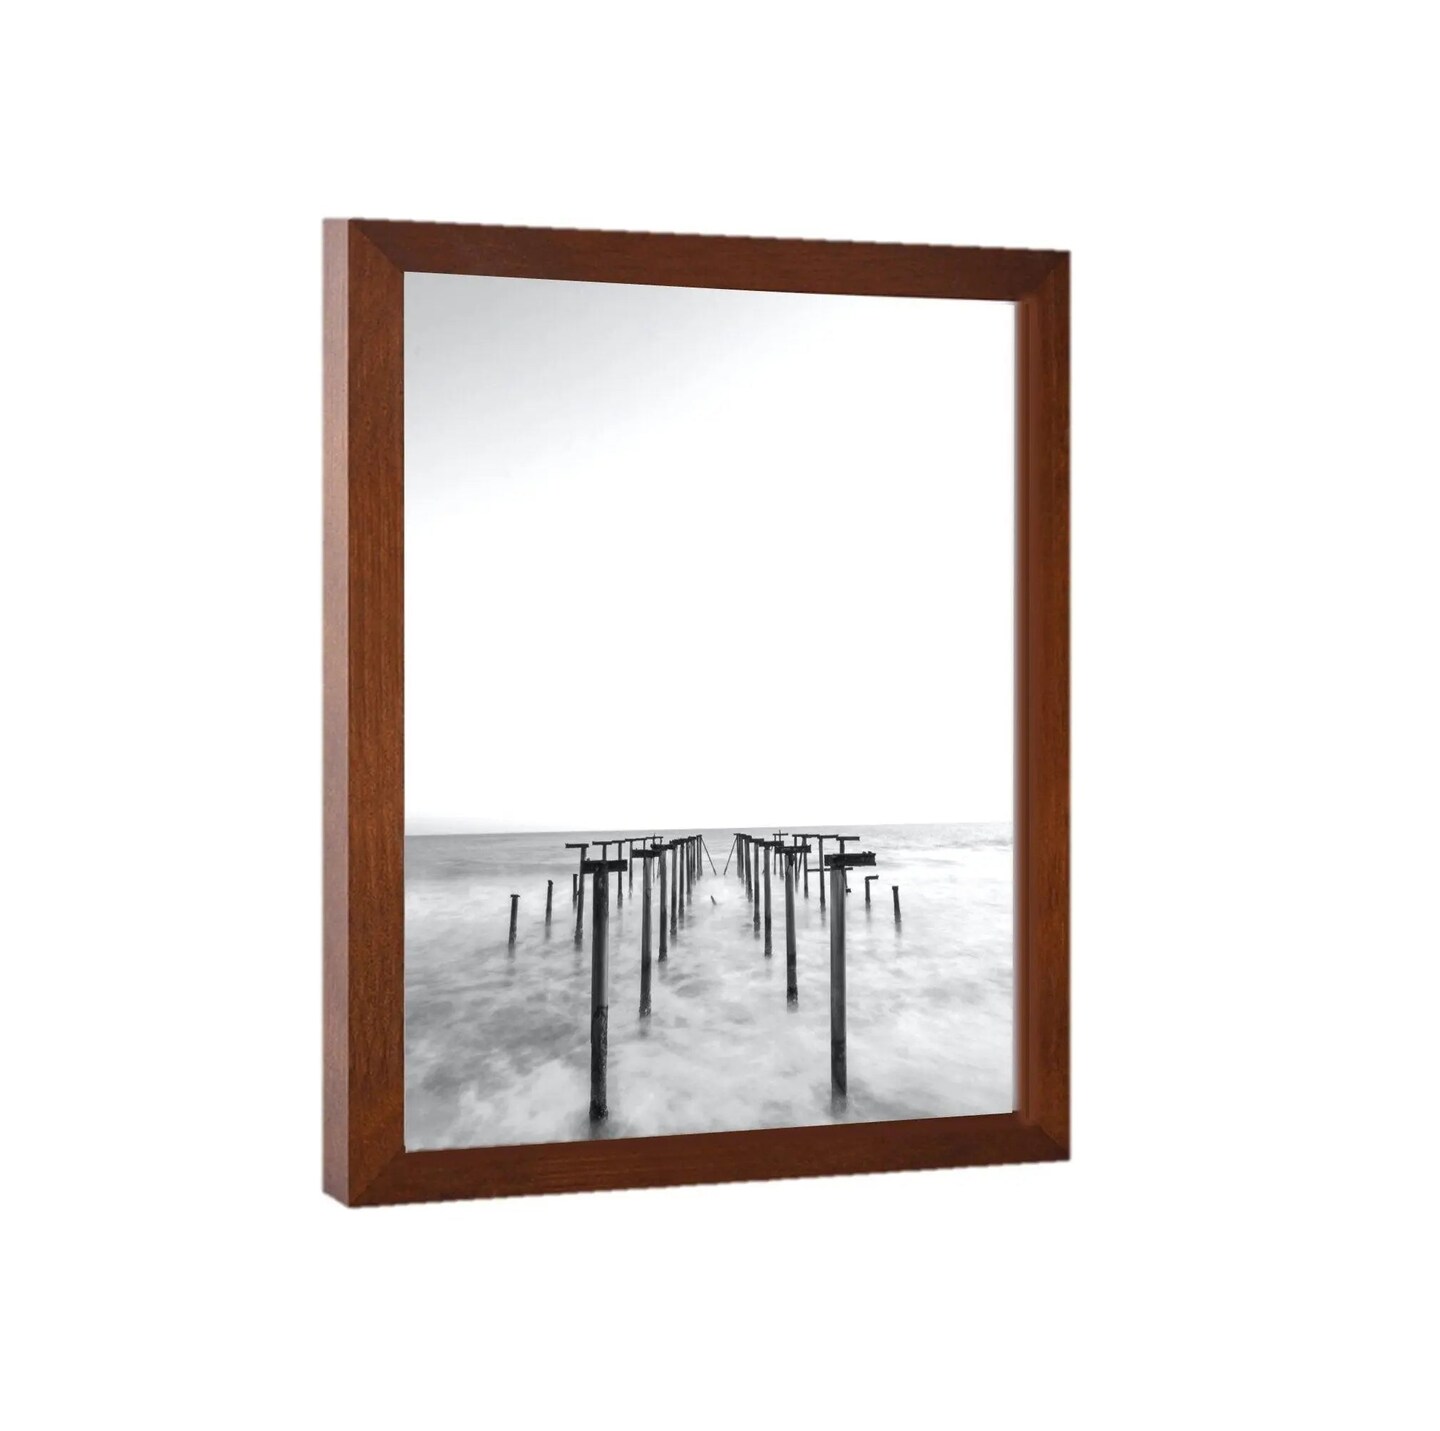 Gallery 36x48 Picture Frame Black 36x48 Frame 36 x 48 Poster Frames 36 x 48